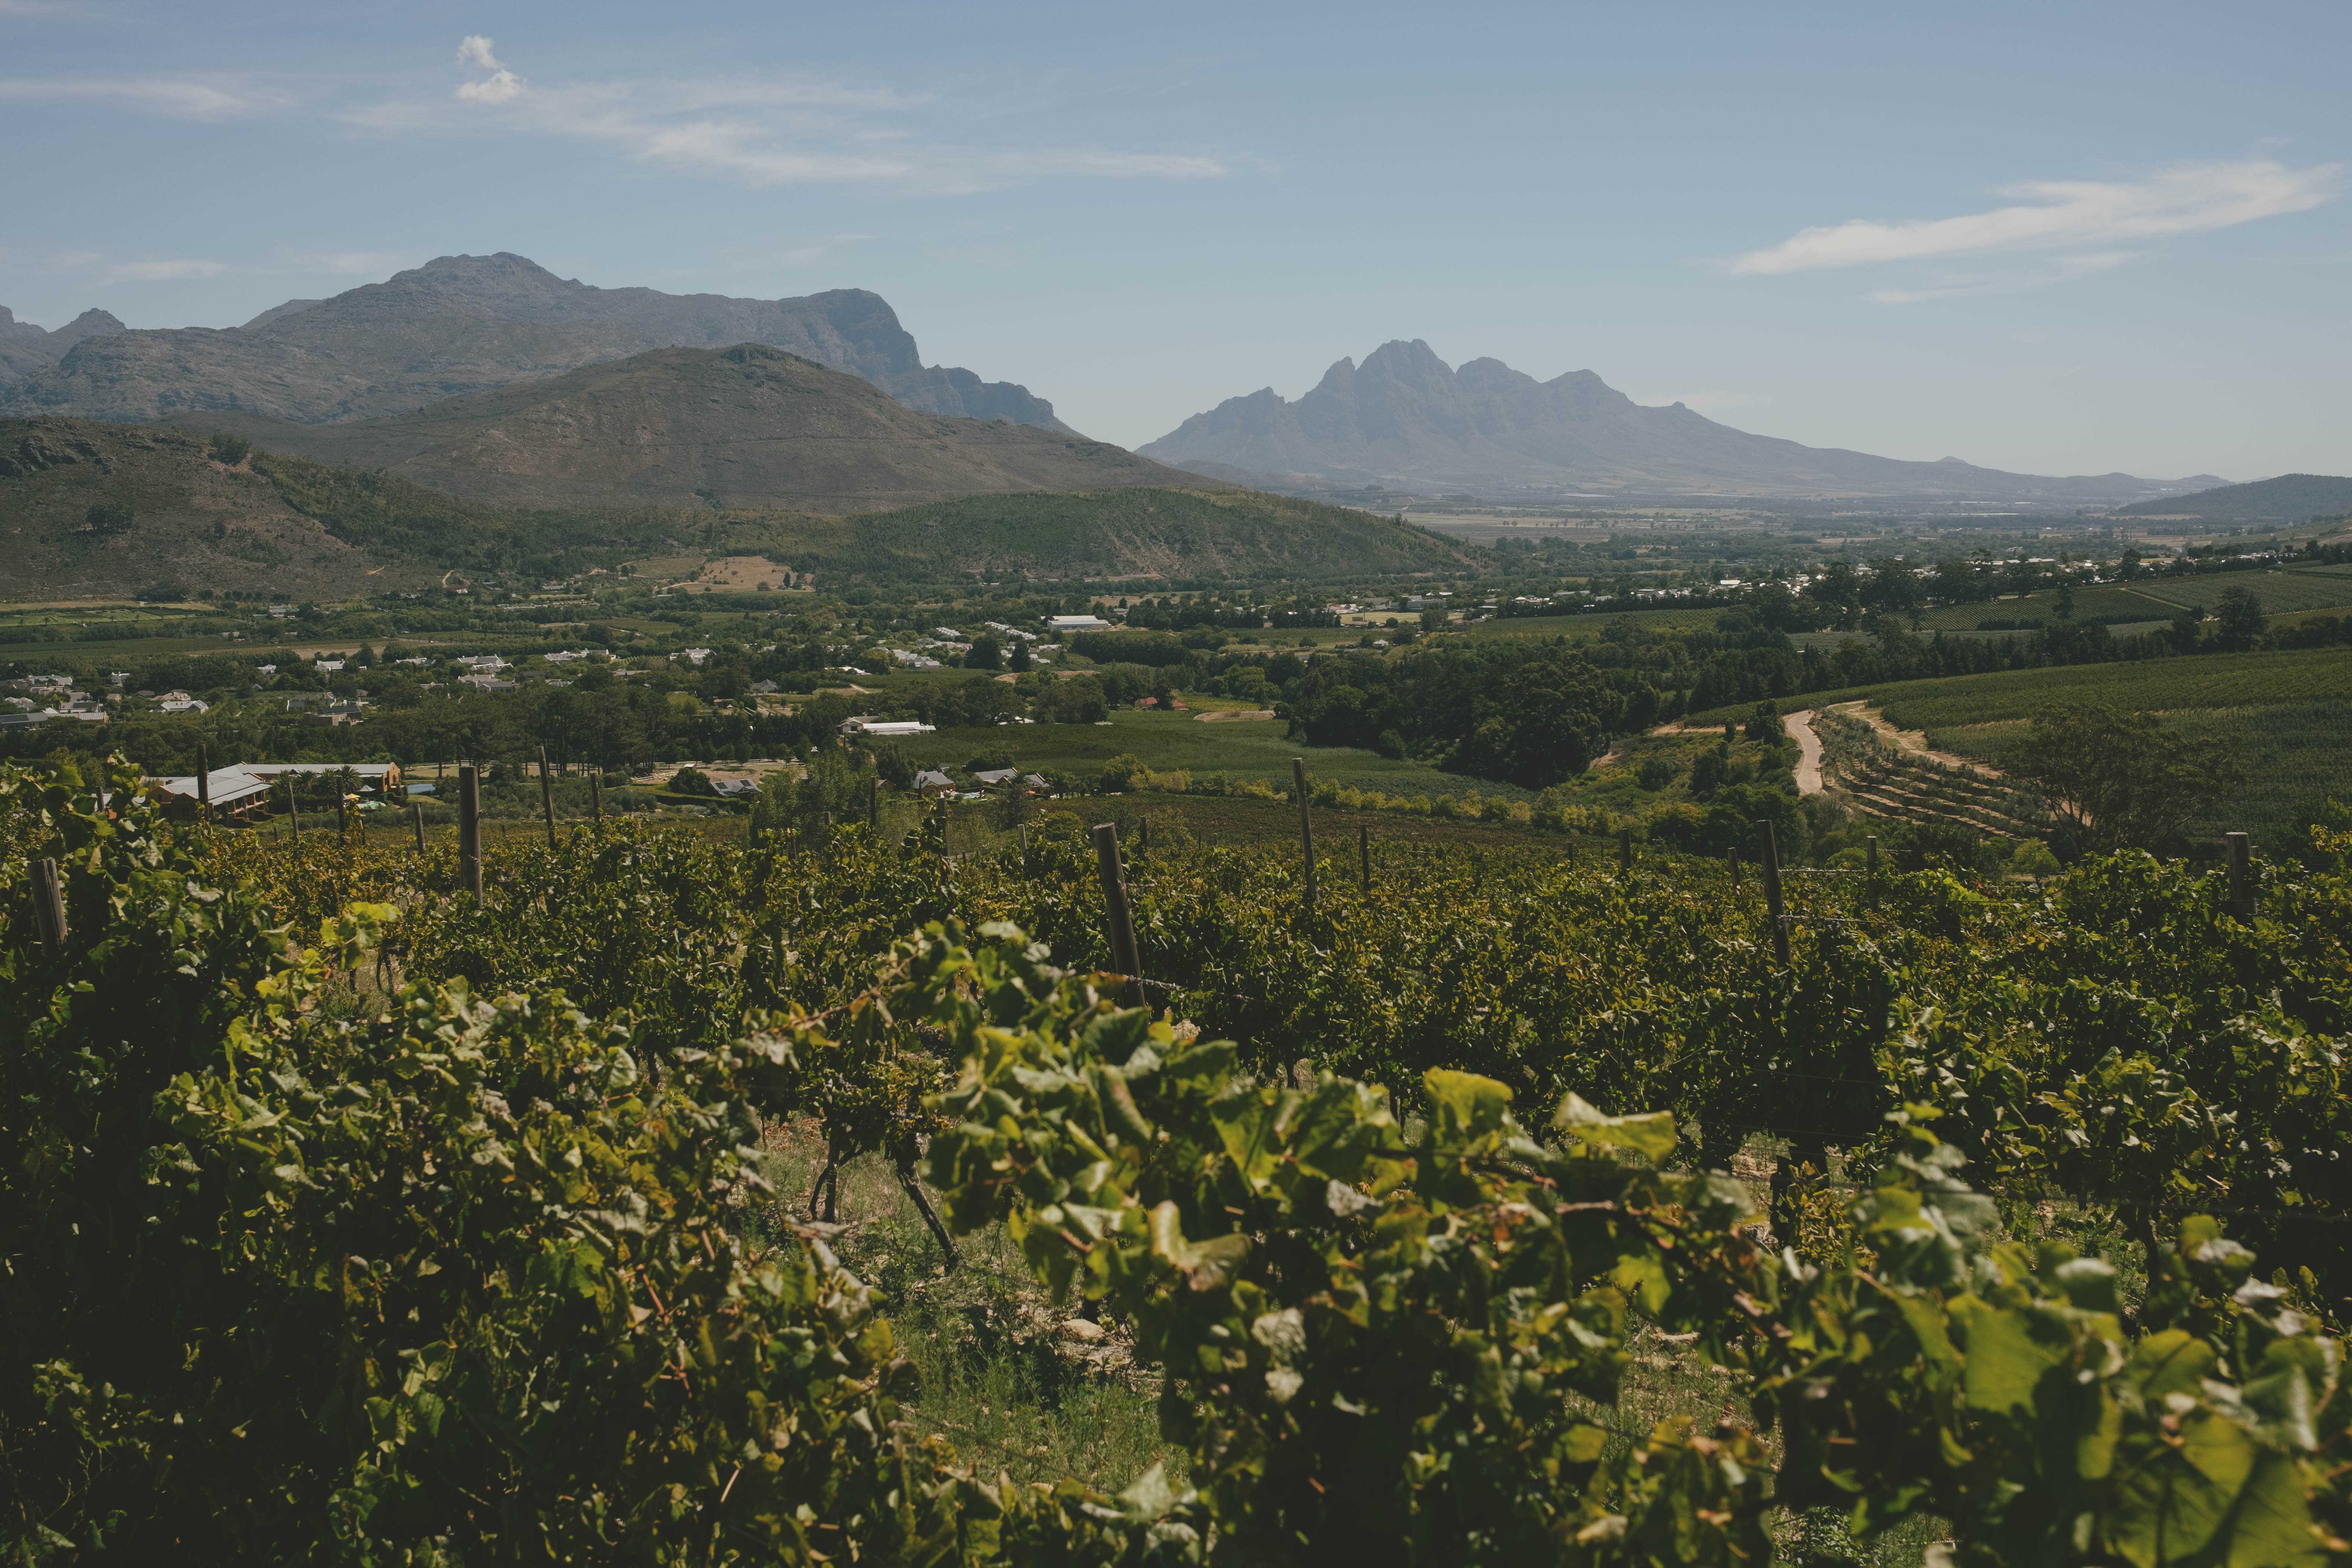 Franschhoek valley with grapevines in the foreground